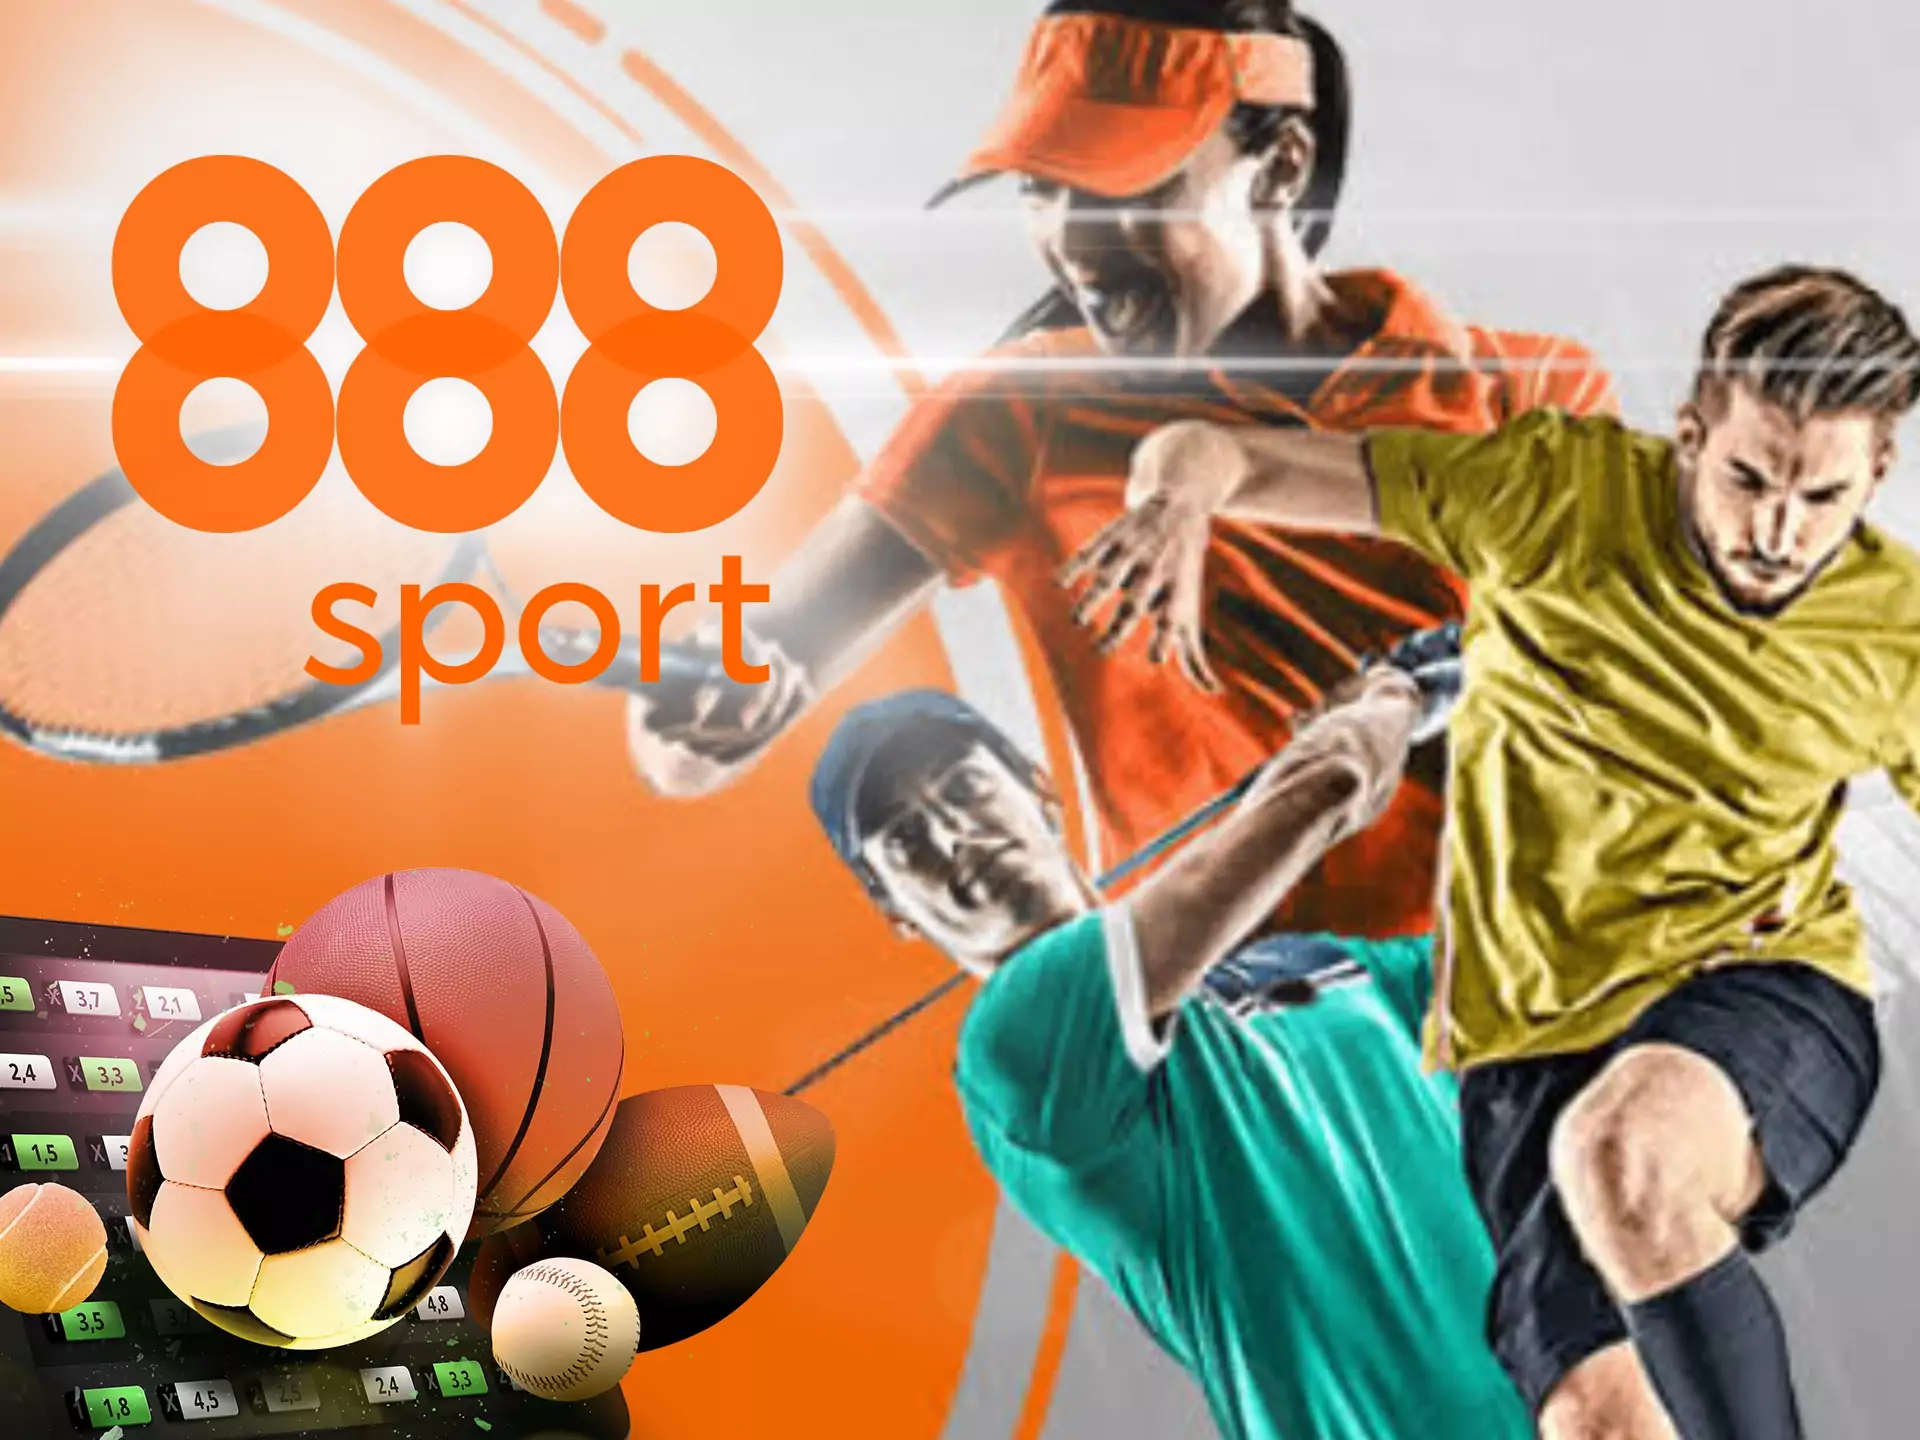 There are a lot of other sport events and attractive odds at 888sport.